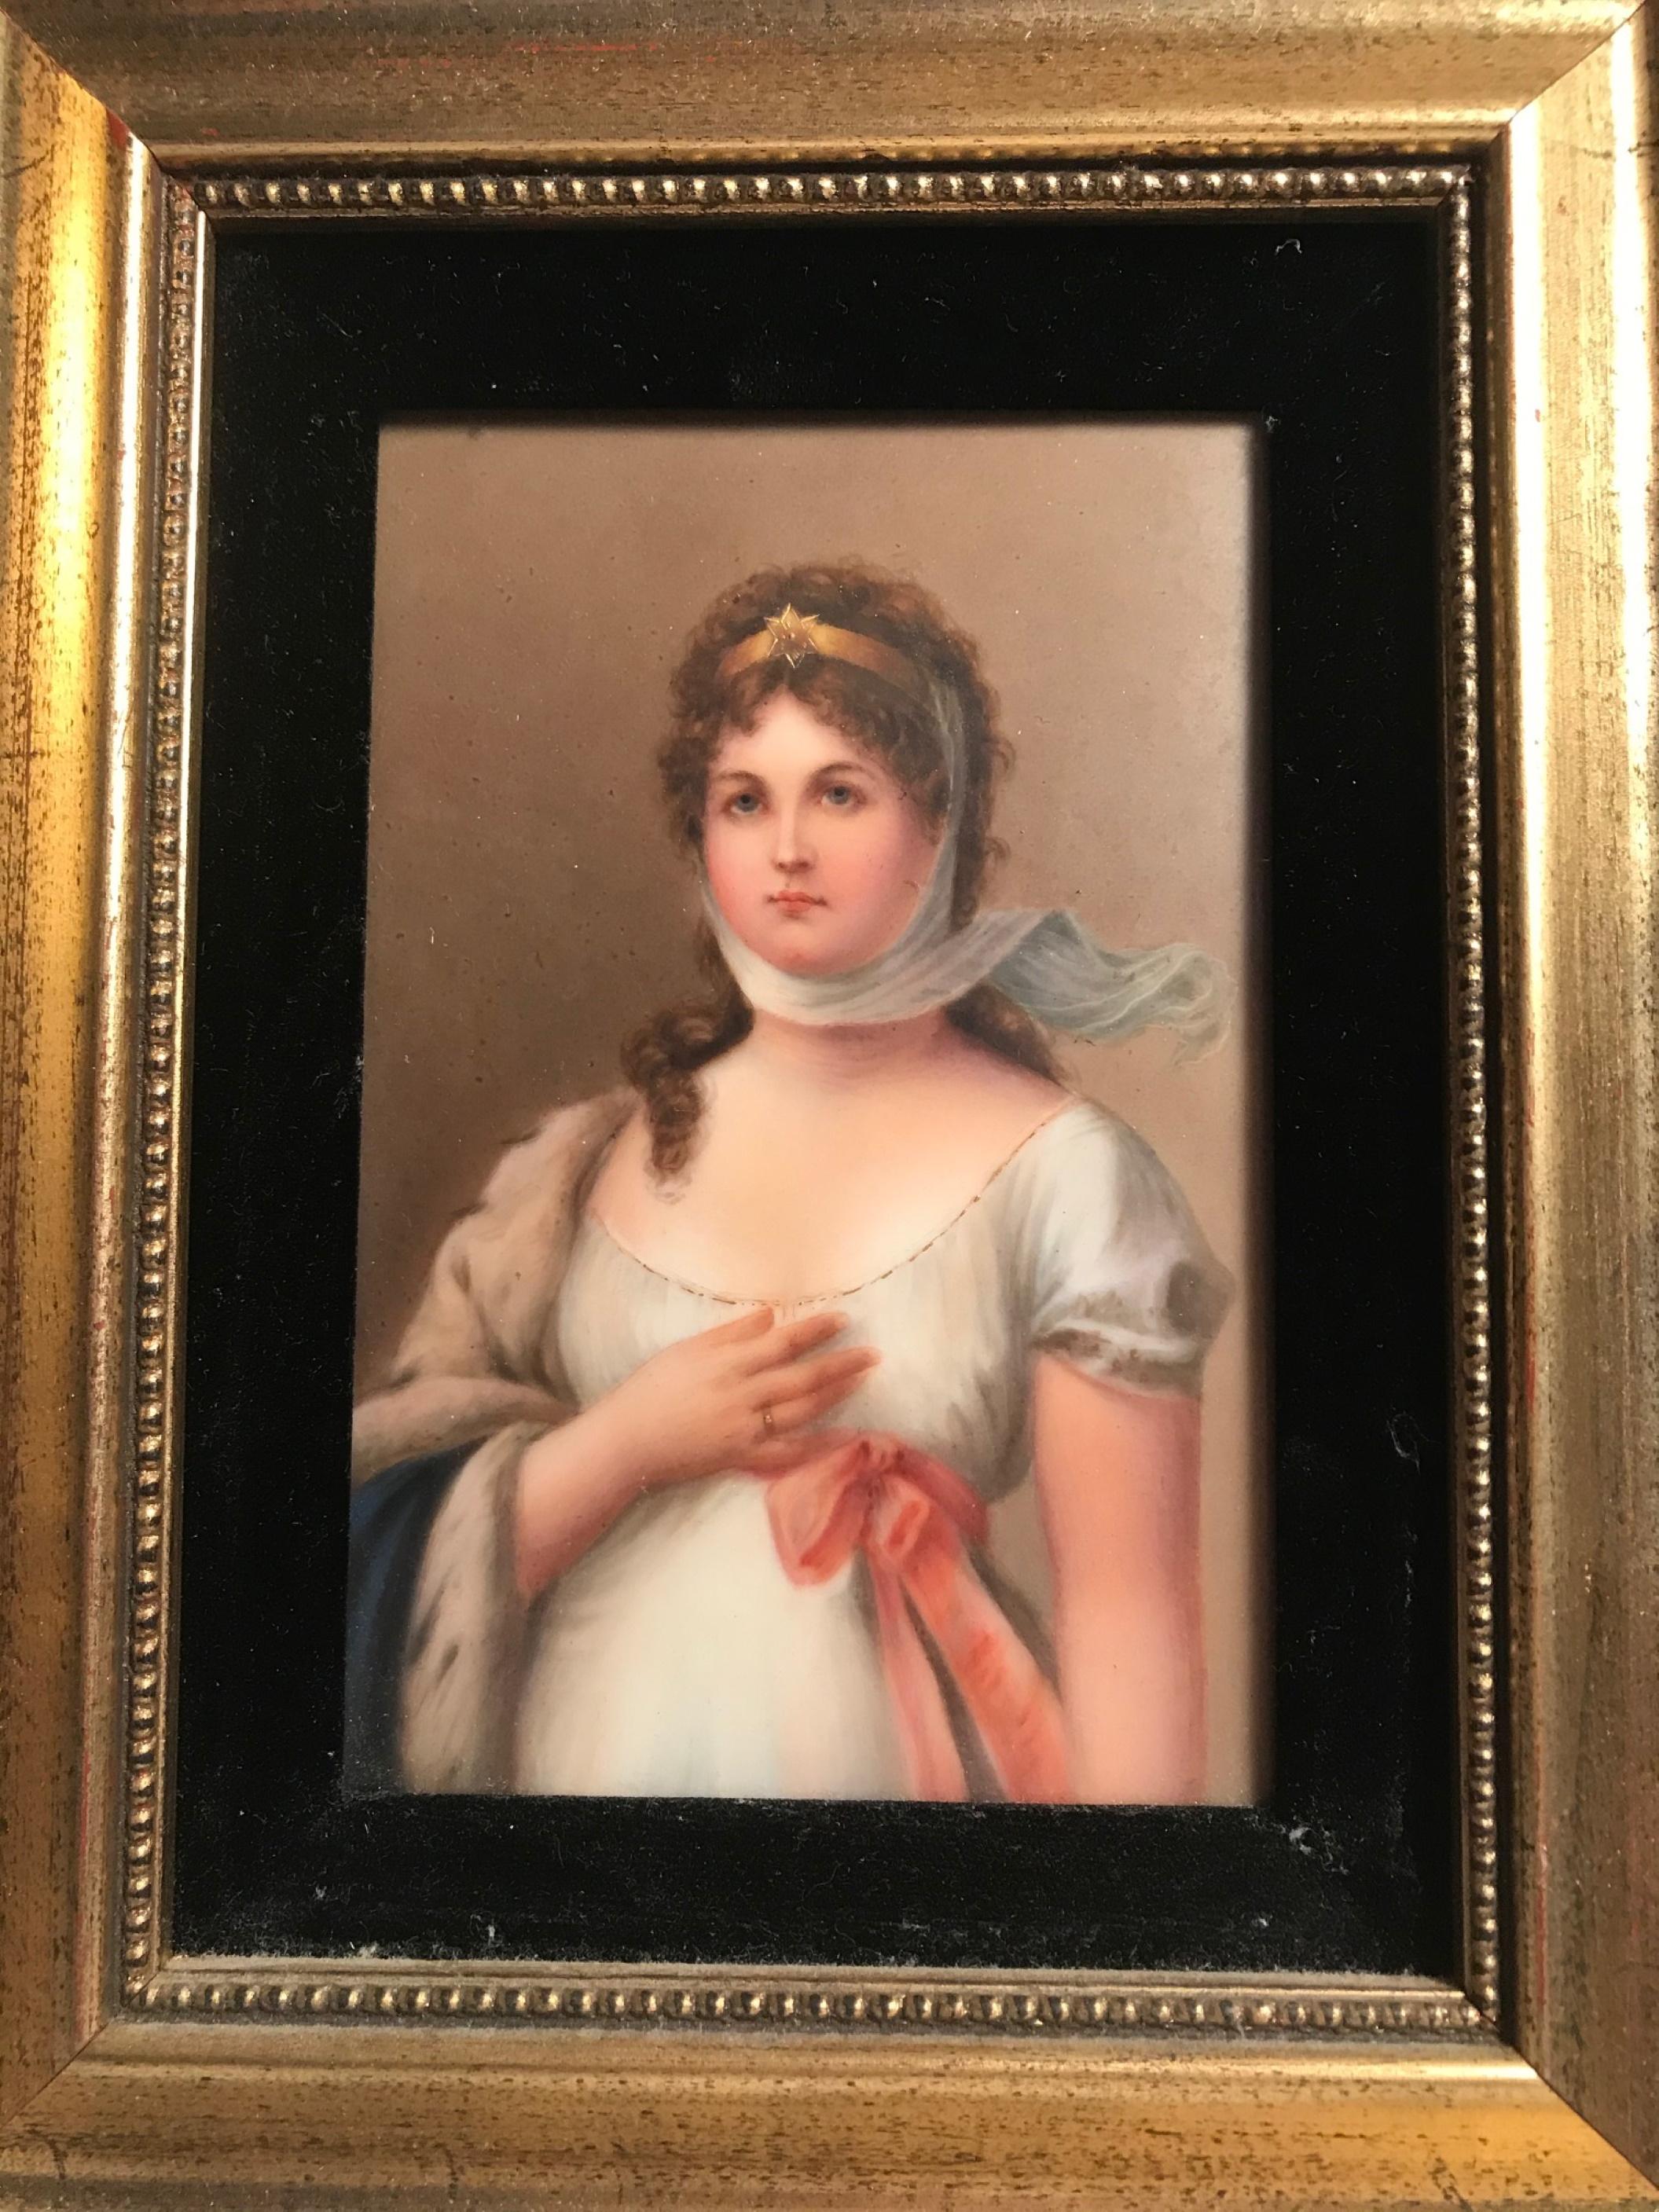 19th century German Porcelain Plaque Queen Louise of Prussia

Hand painted rectangular porcelain plaque of Queen Louise of Prussia in half profile. After artist, Gustav Richter (1823-1884). She has a scarf wrapped around her head and a gold diadem